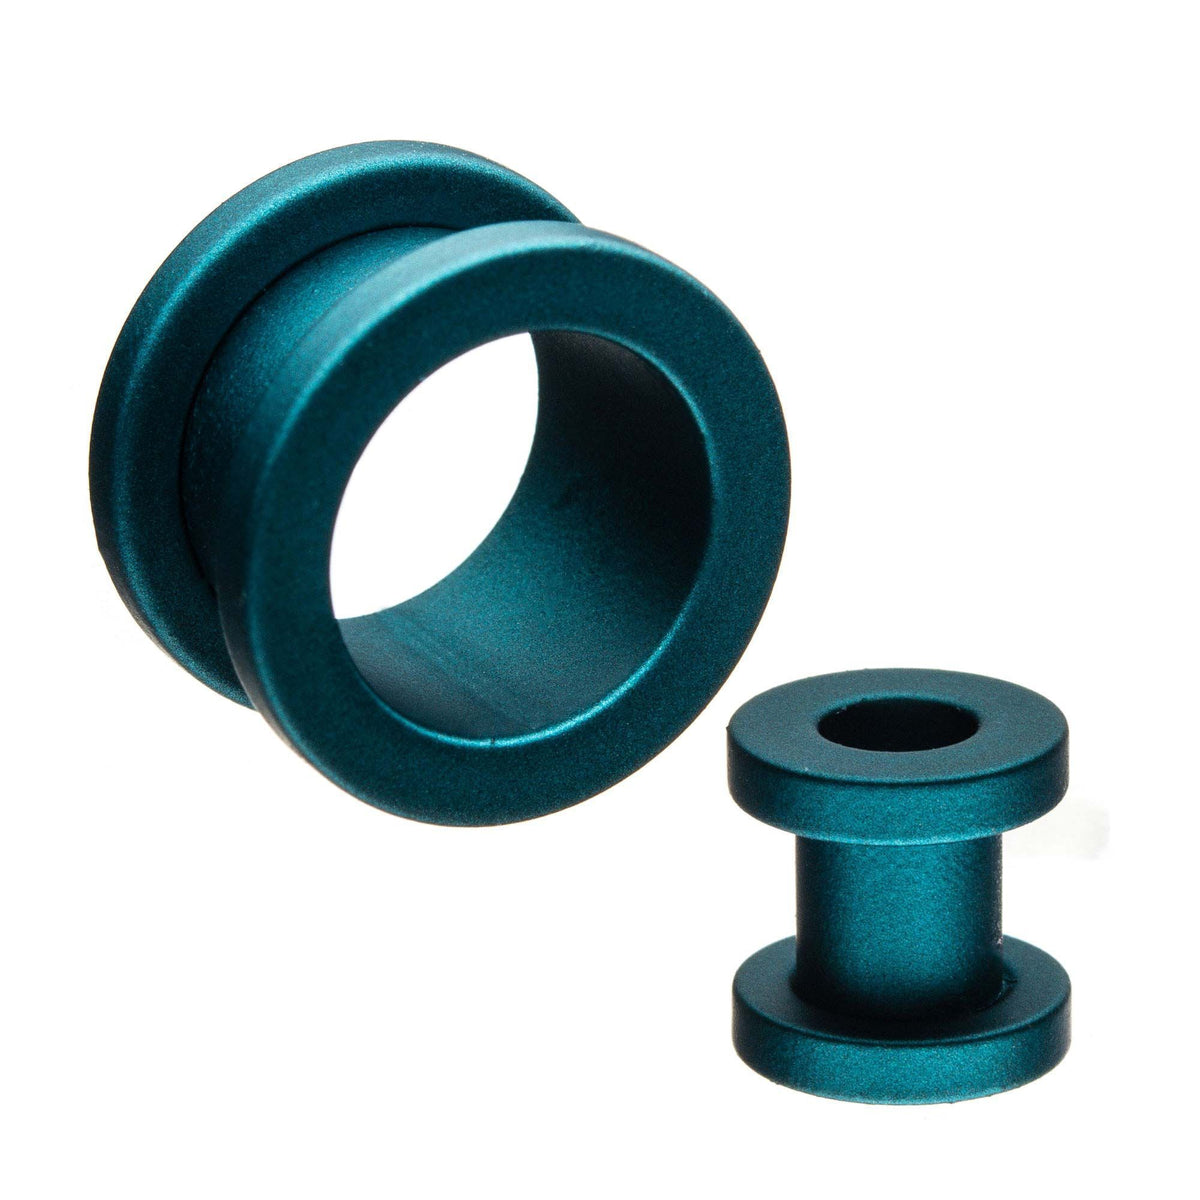 Peacock Blue Silicone Coated Screw Fit Tunnel Plugs - 1 Pair  sbvpsrpdb